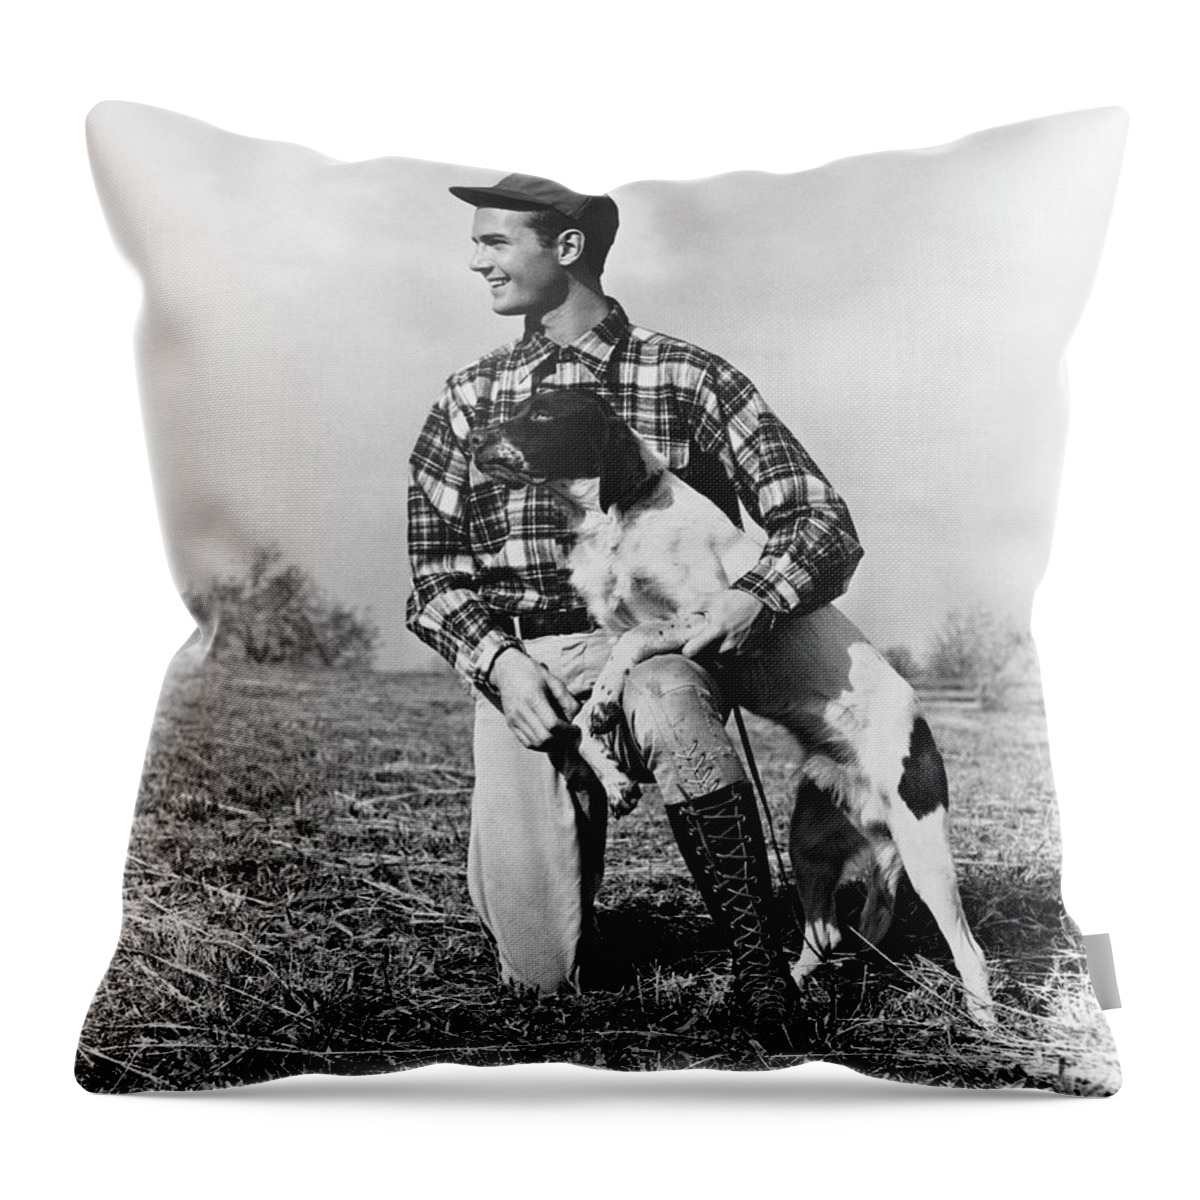 Pets Throw Pillow featuring the photograph Man Kneeling Down Next To Setter, Arm by H. Armstrong Roberts